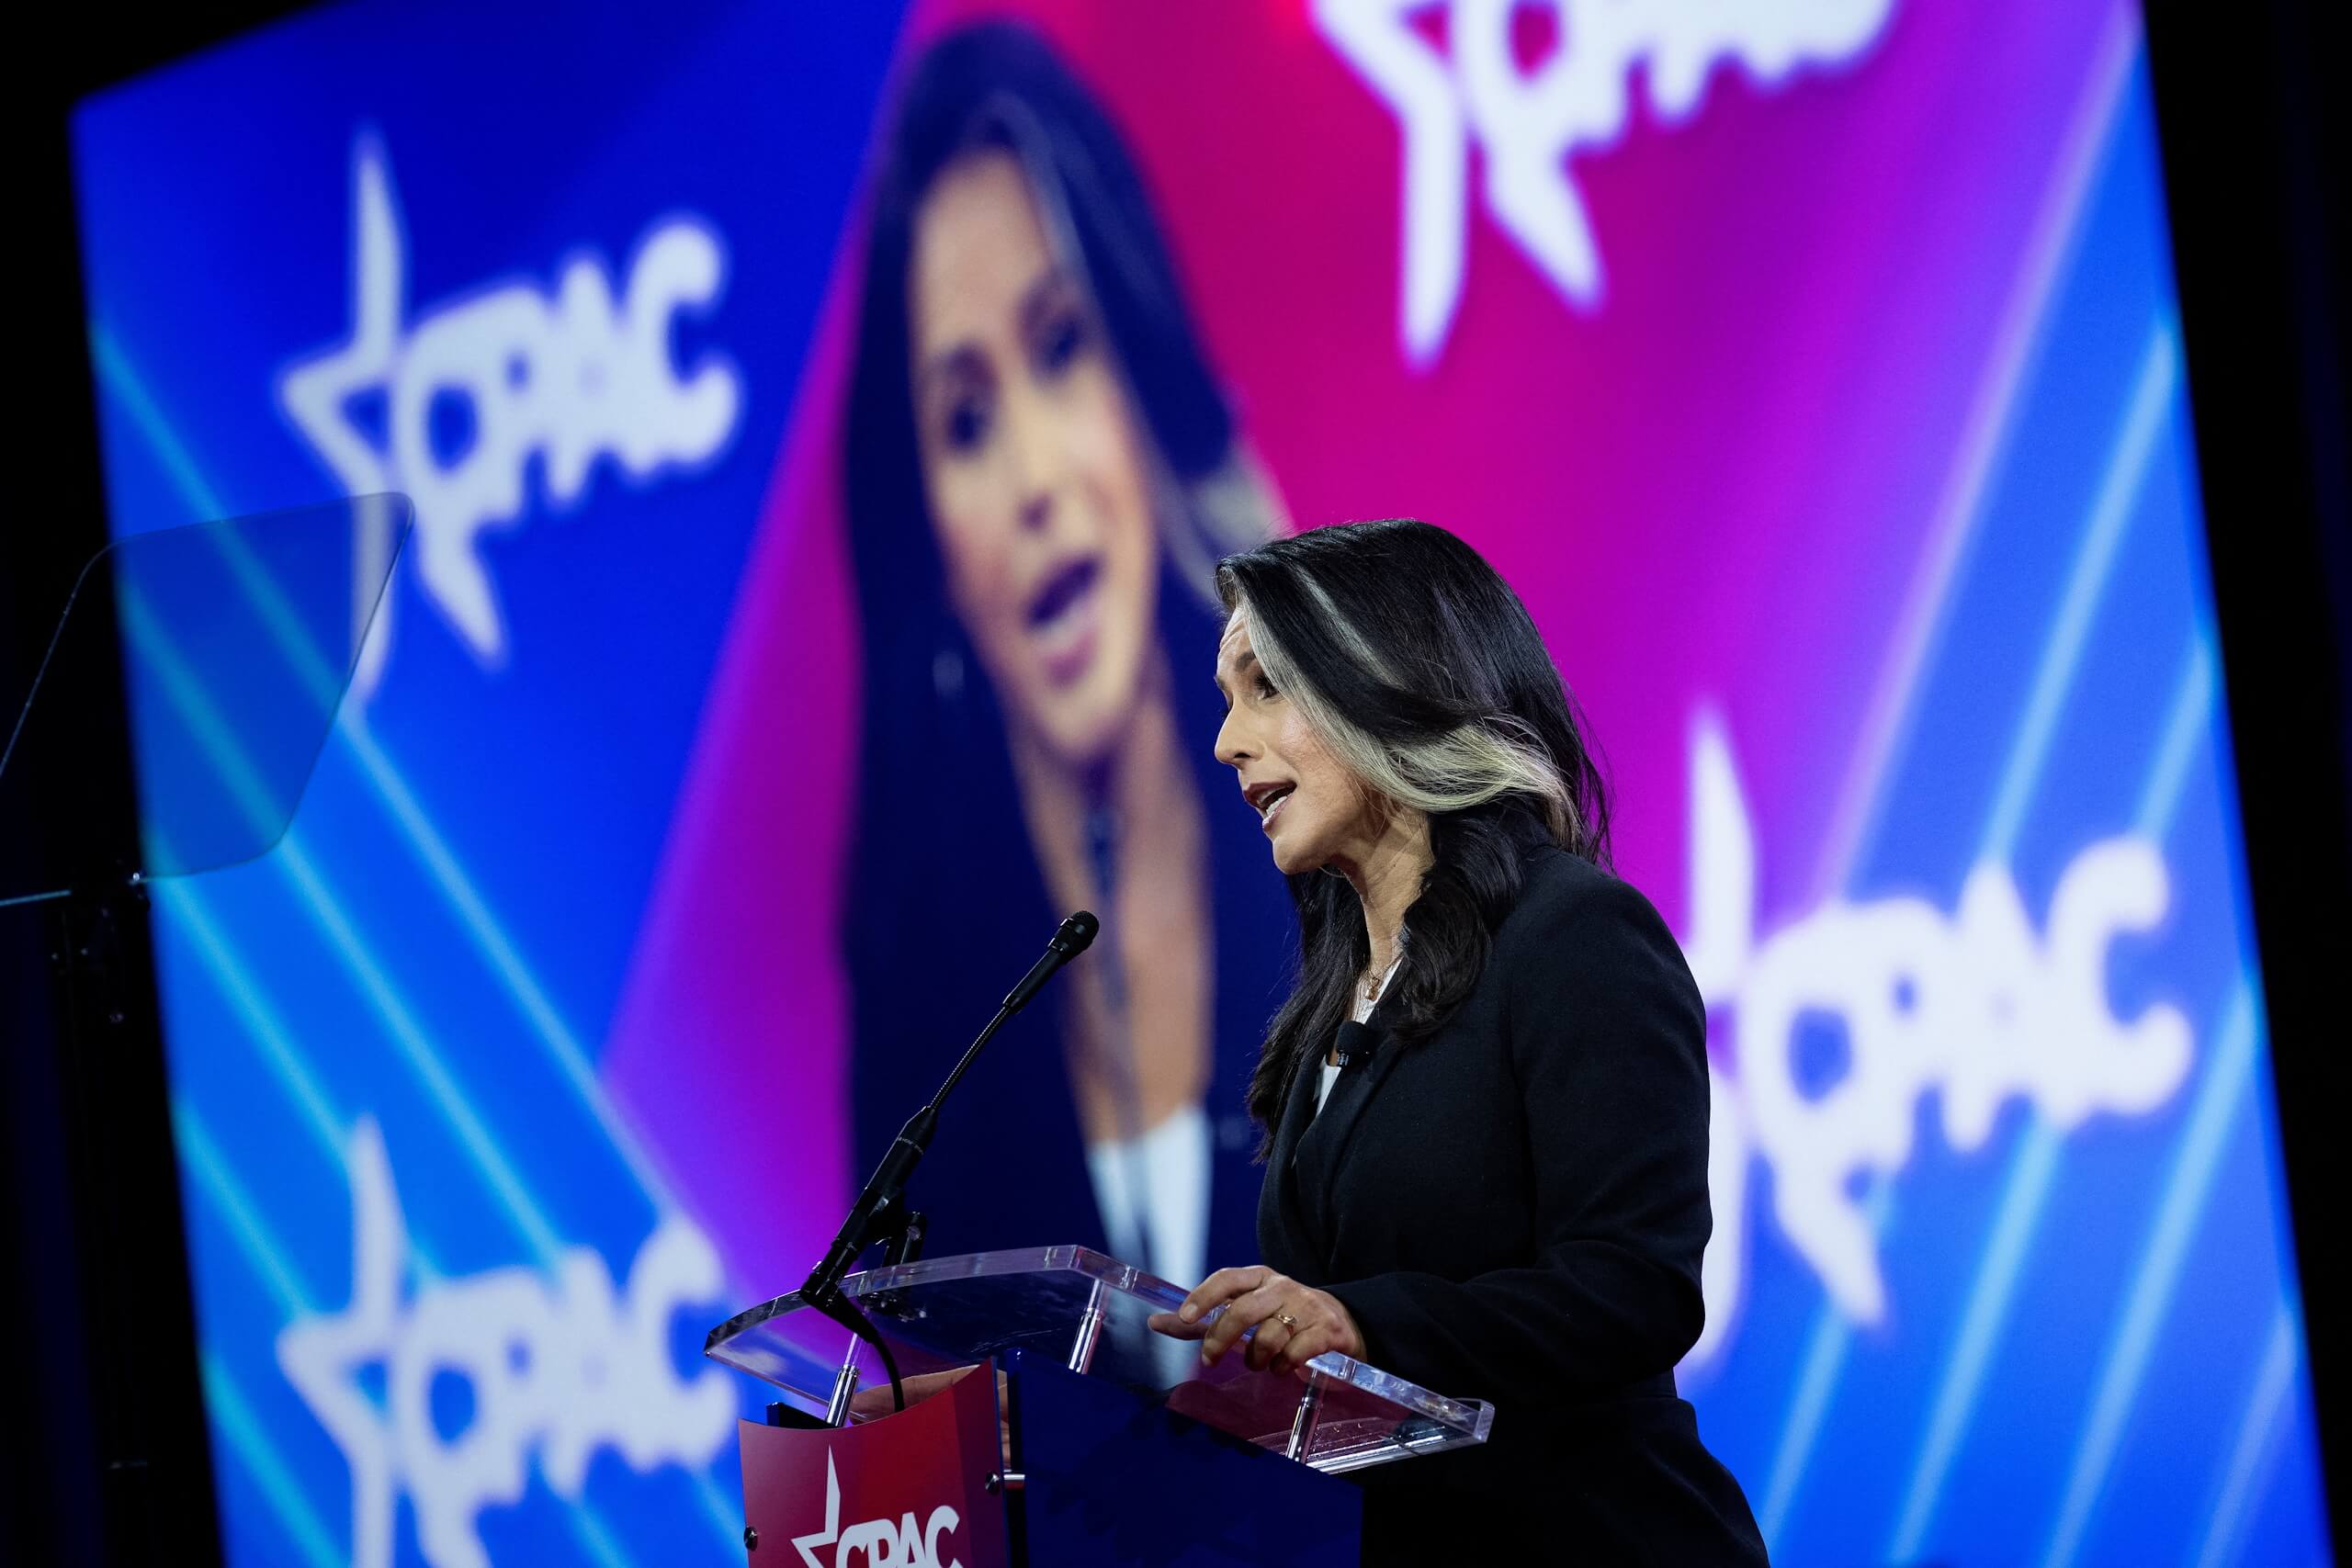 Tulsi Gabbard steps up to defend religious freedom - from her former political party › American Greatness